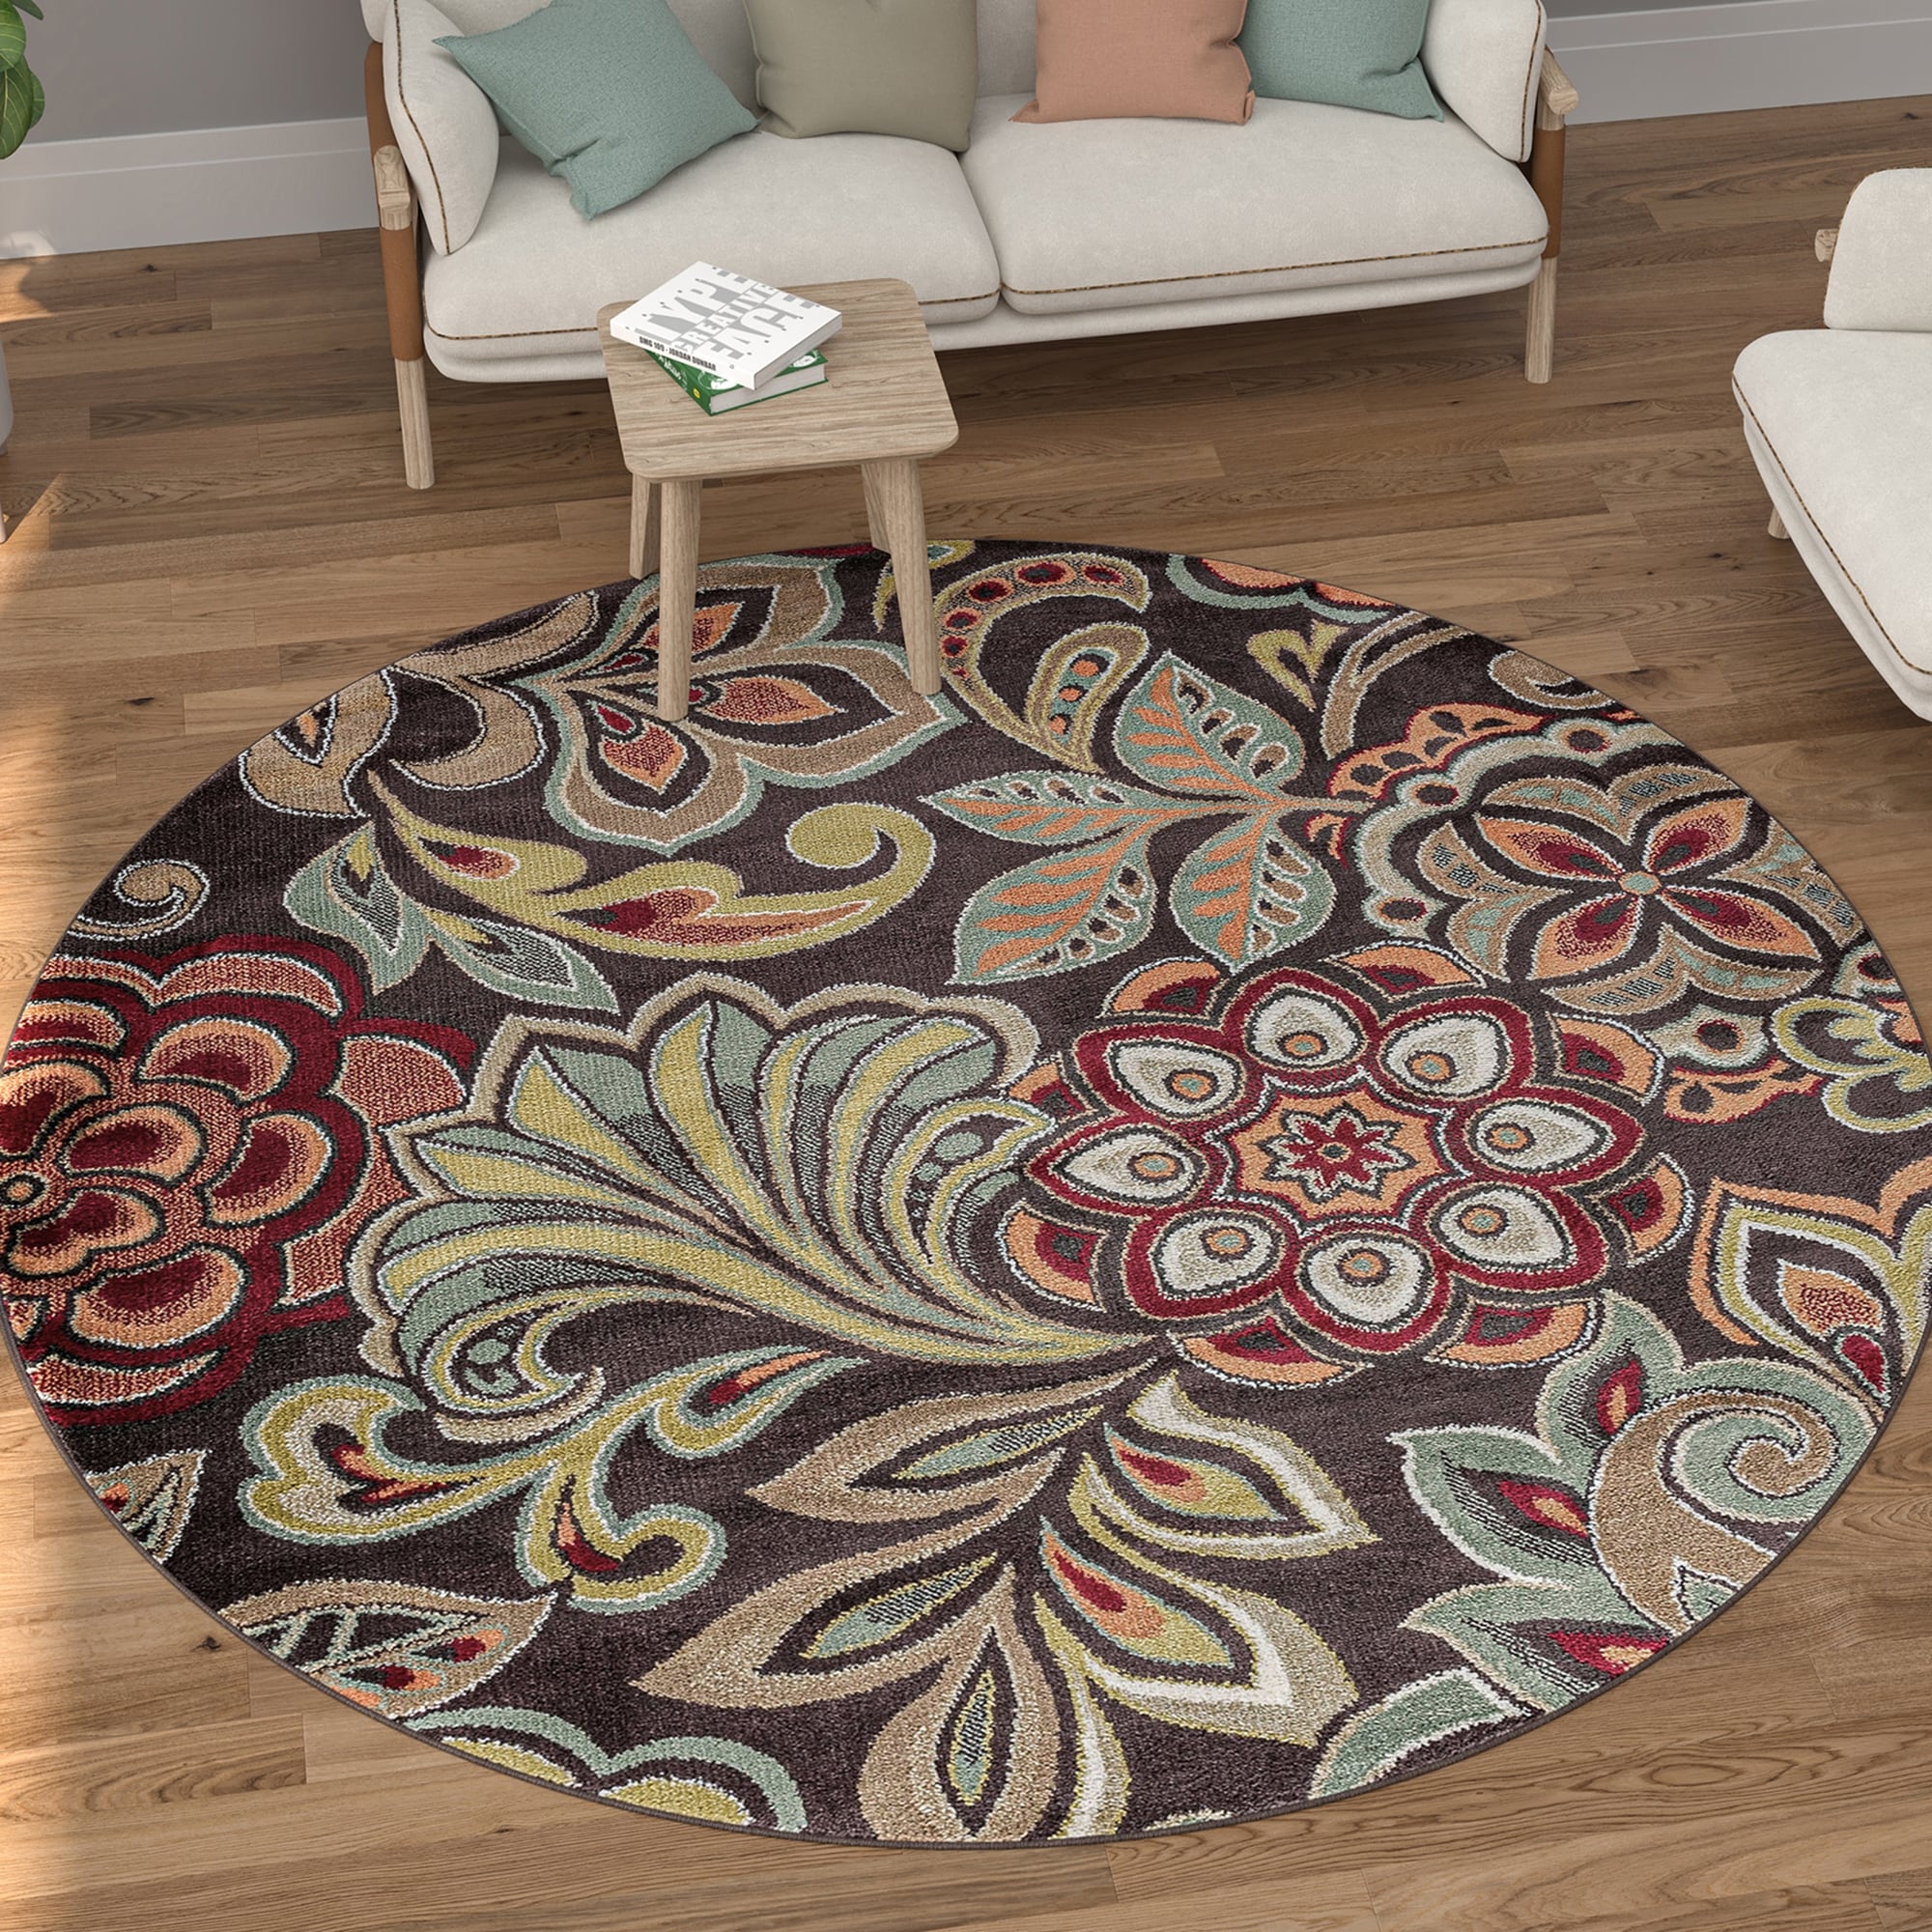 https://ak1.ostkcdn.com/images/products/is/images/direct/0e3d8749008bc6f6c8f48180b744c56bfbfb37f7/Alise-Rugs-Decora-Contemporary-Floral-Rug.jpg